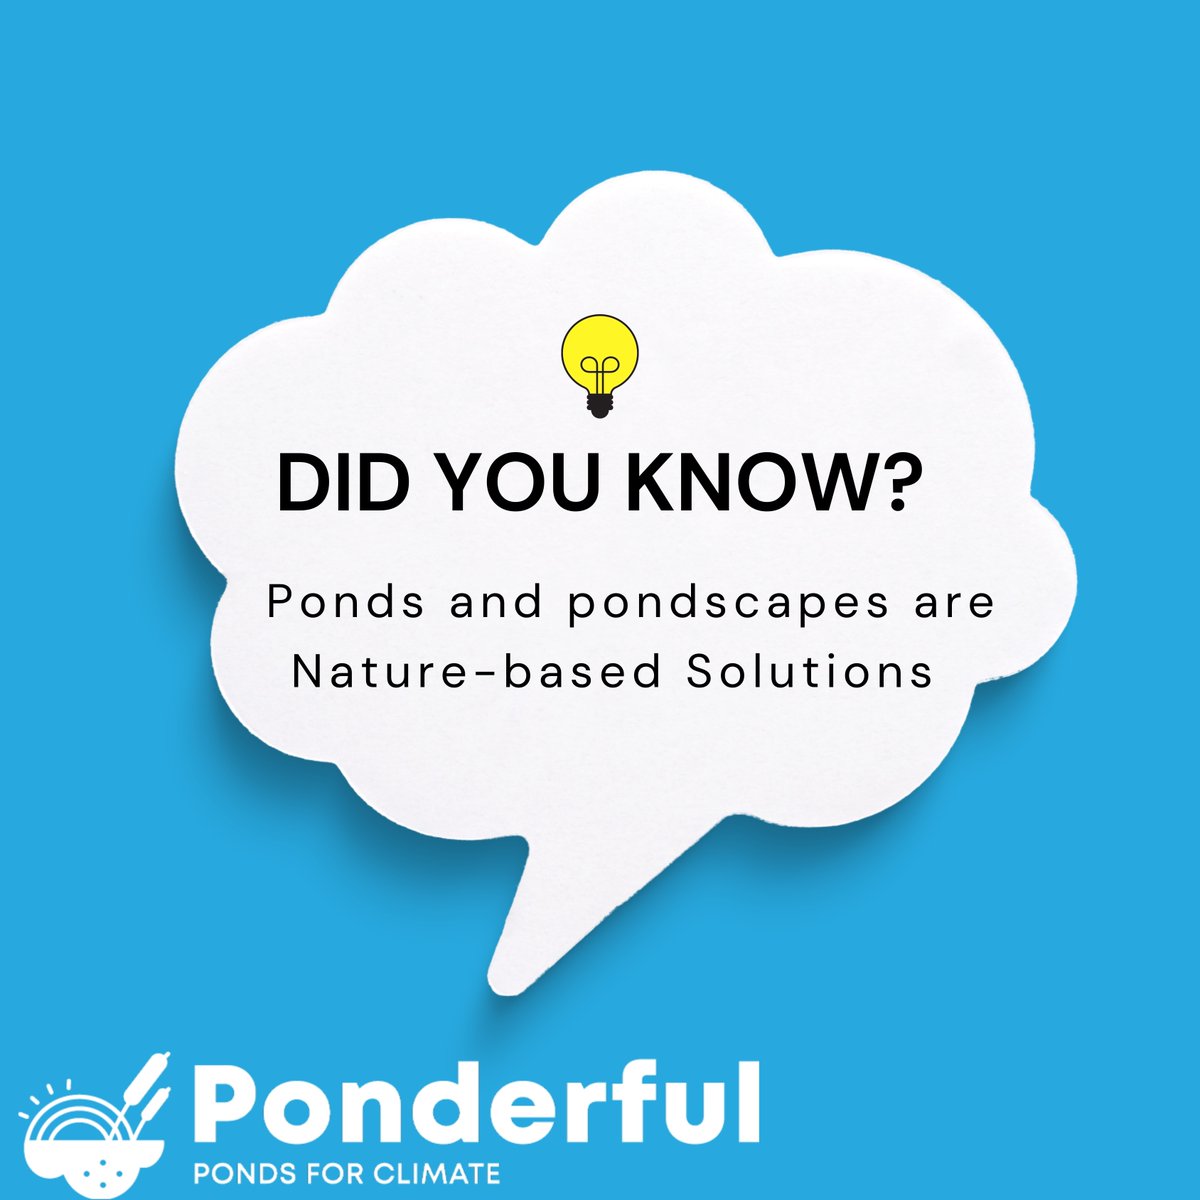 Ponds and pondscapes can be important Nature-based Solutions for climate change mitigation and adaptation, biodiversity conservation and delivery of ecosystem services. Find out more about #PONDERFUL: ponderful.eu